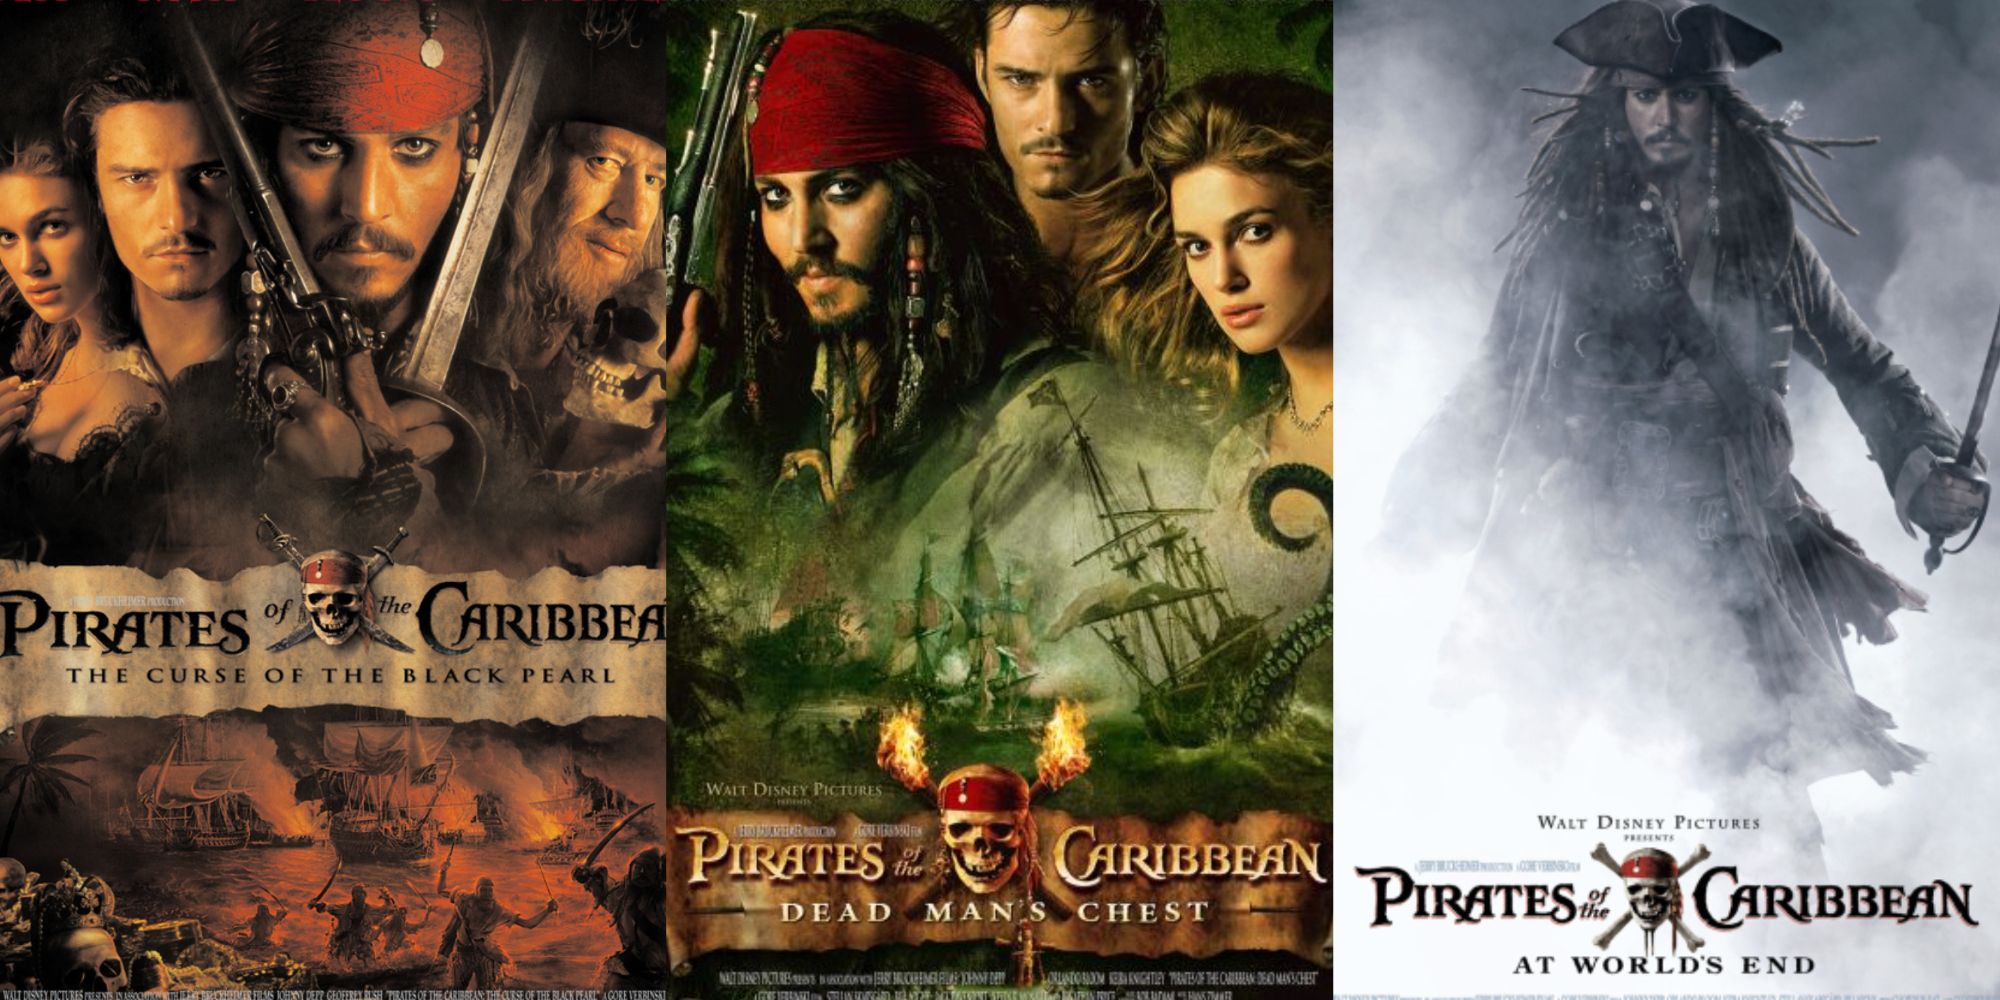 pirates-of-the-caribbean-curse-of-the-black-pearl-of-the-dead-chest-at-the-end-of-worlds-movie covers